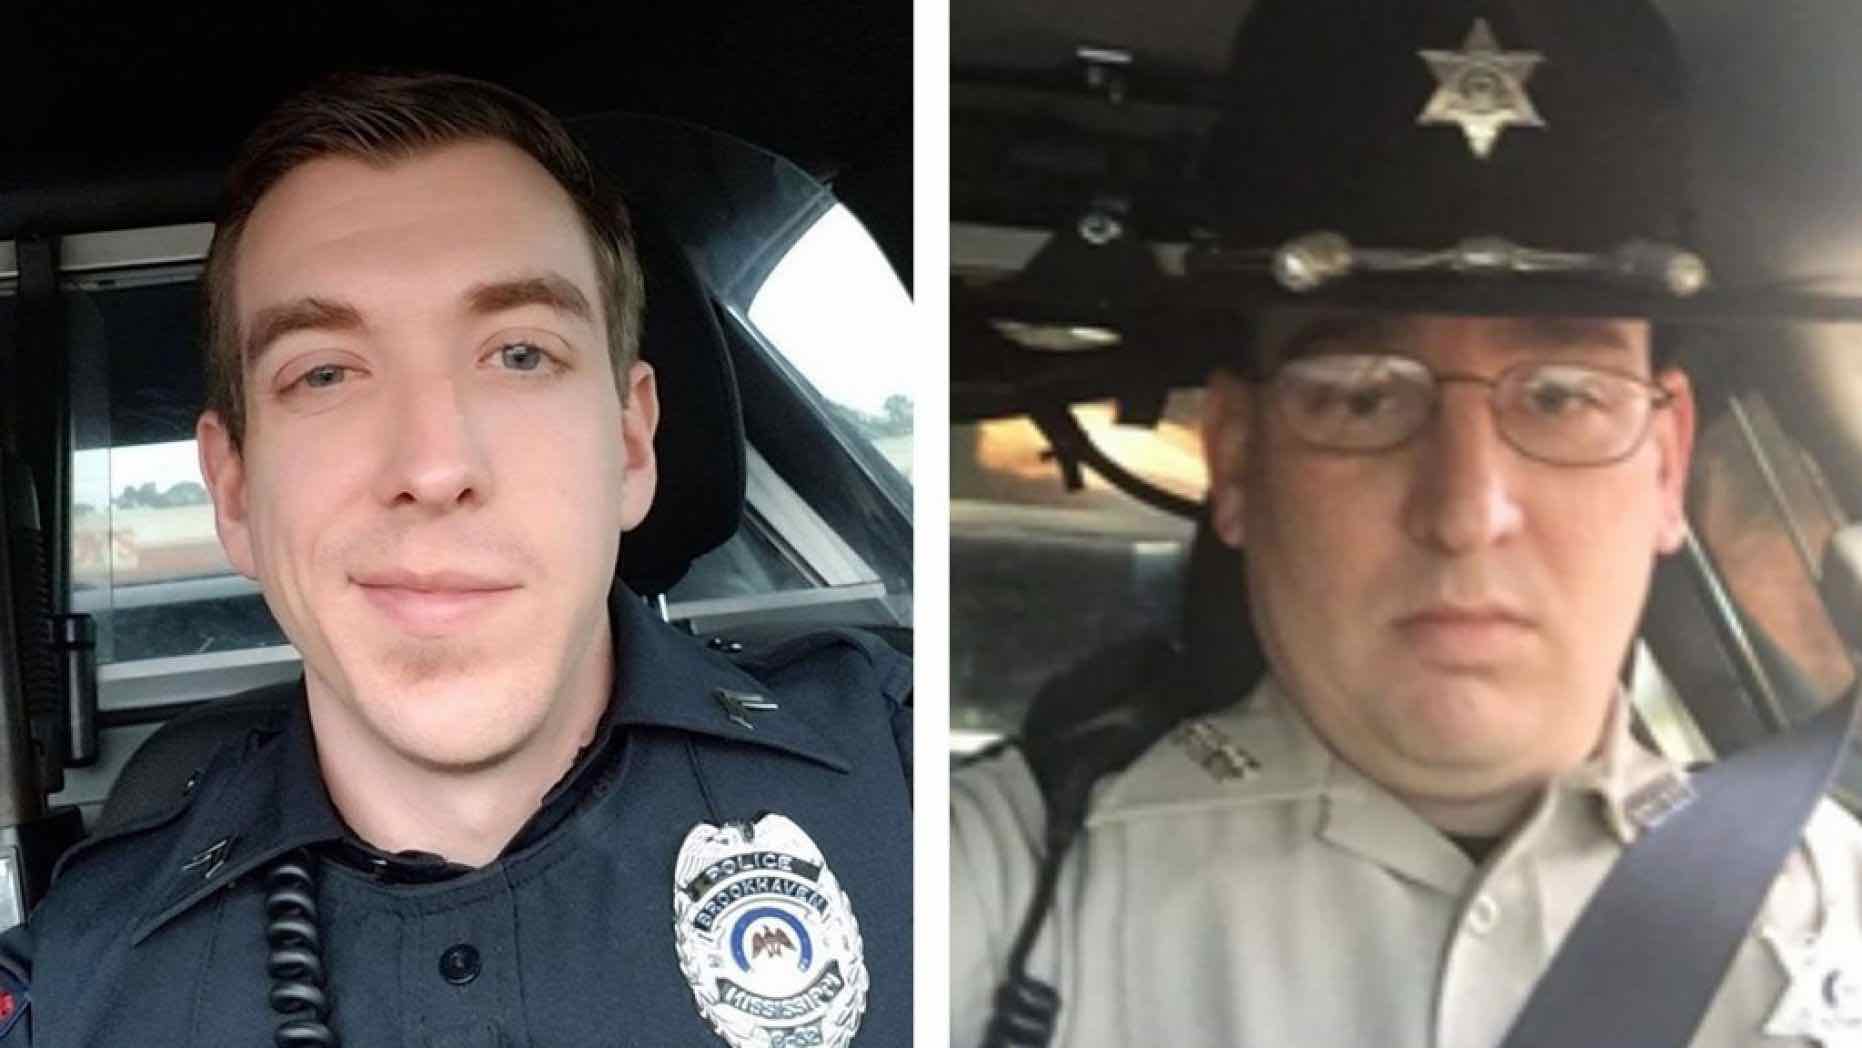 Mississippi officers killed, wounded suspect in custody: Report